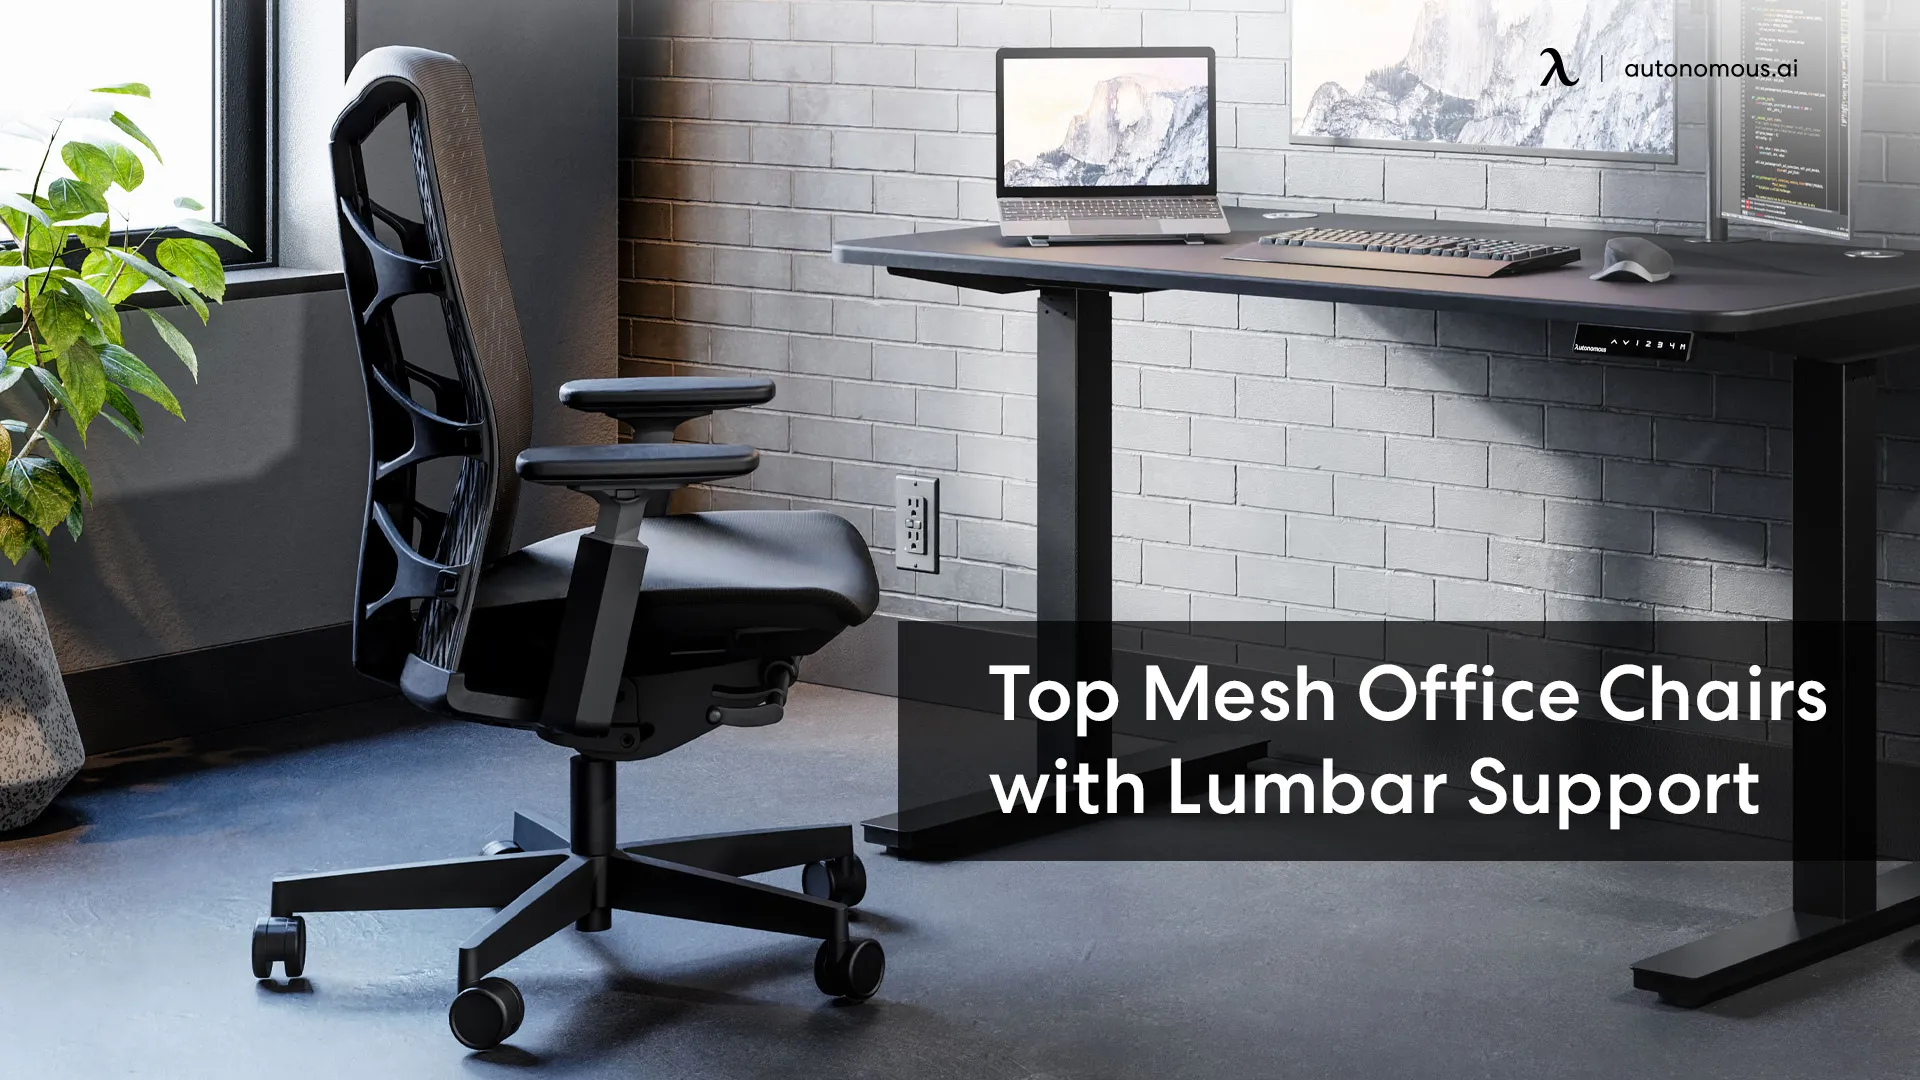 The 5 Best Ergonomic Mesh Office Chairs with Lumbar Support